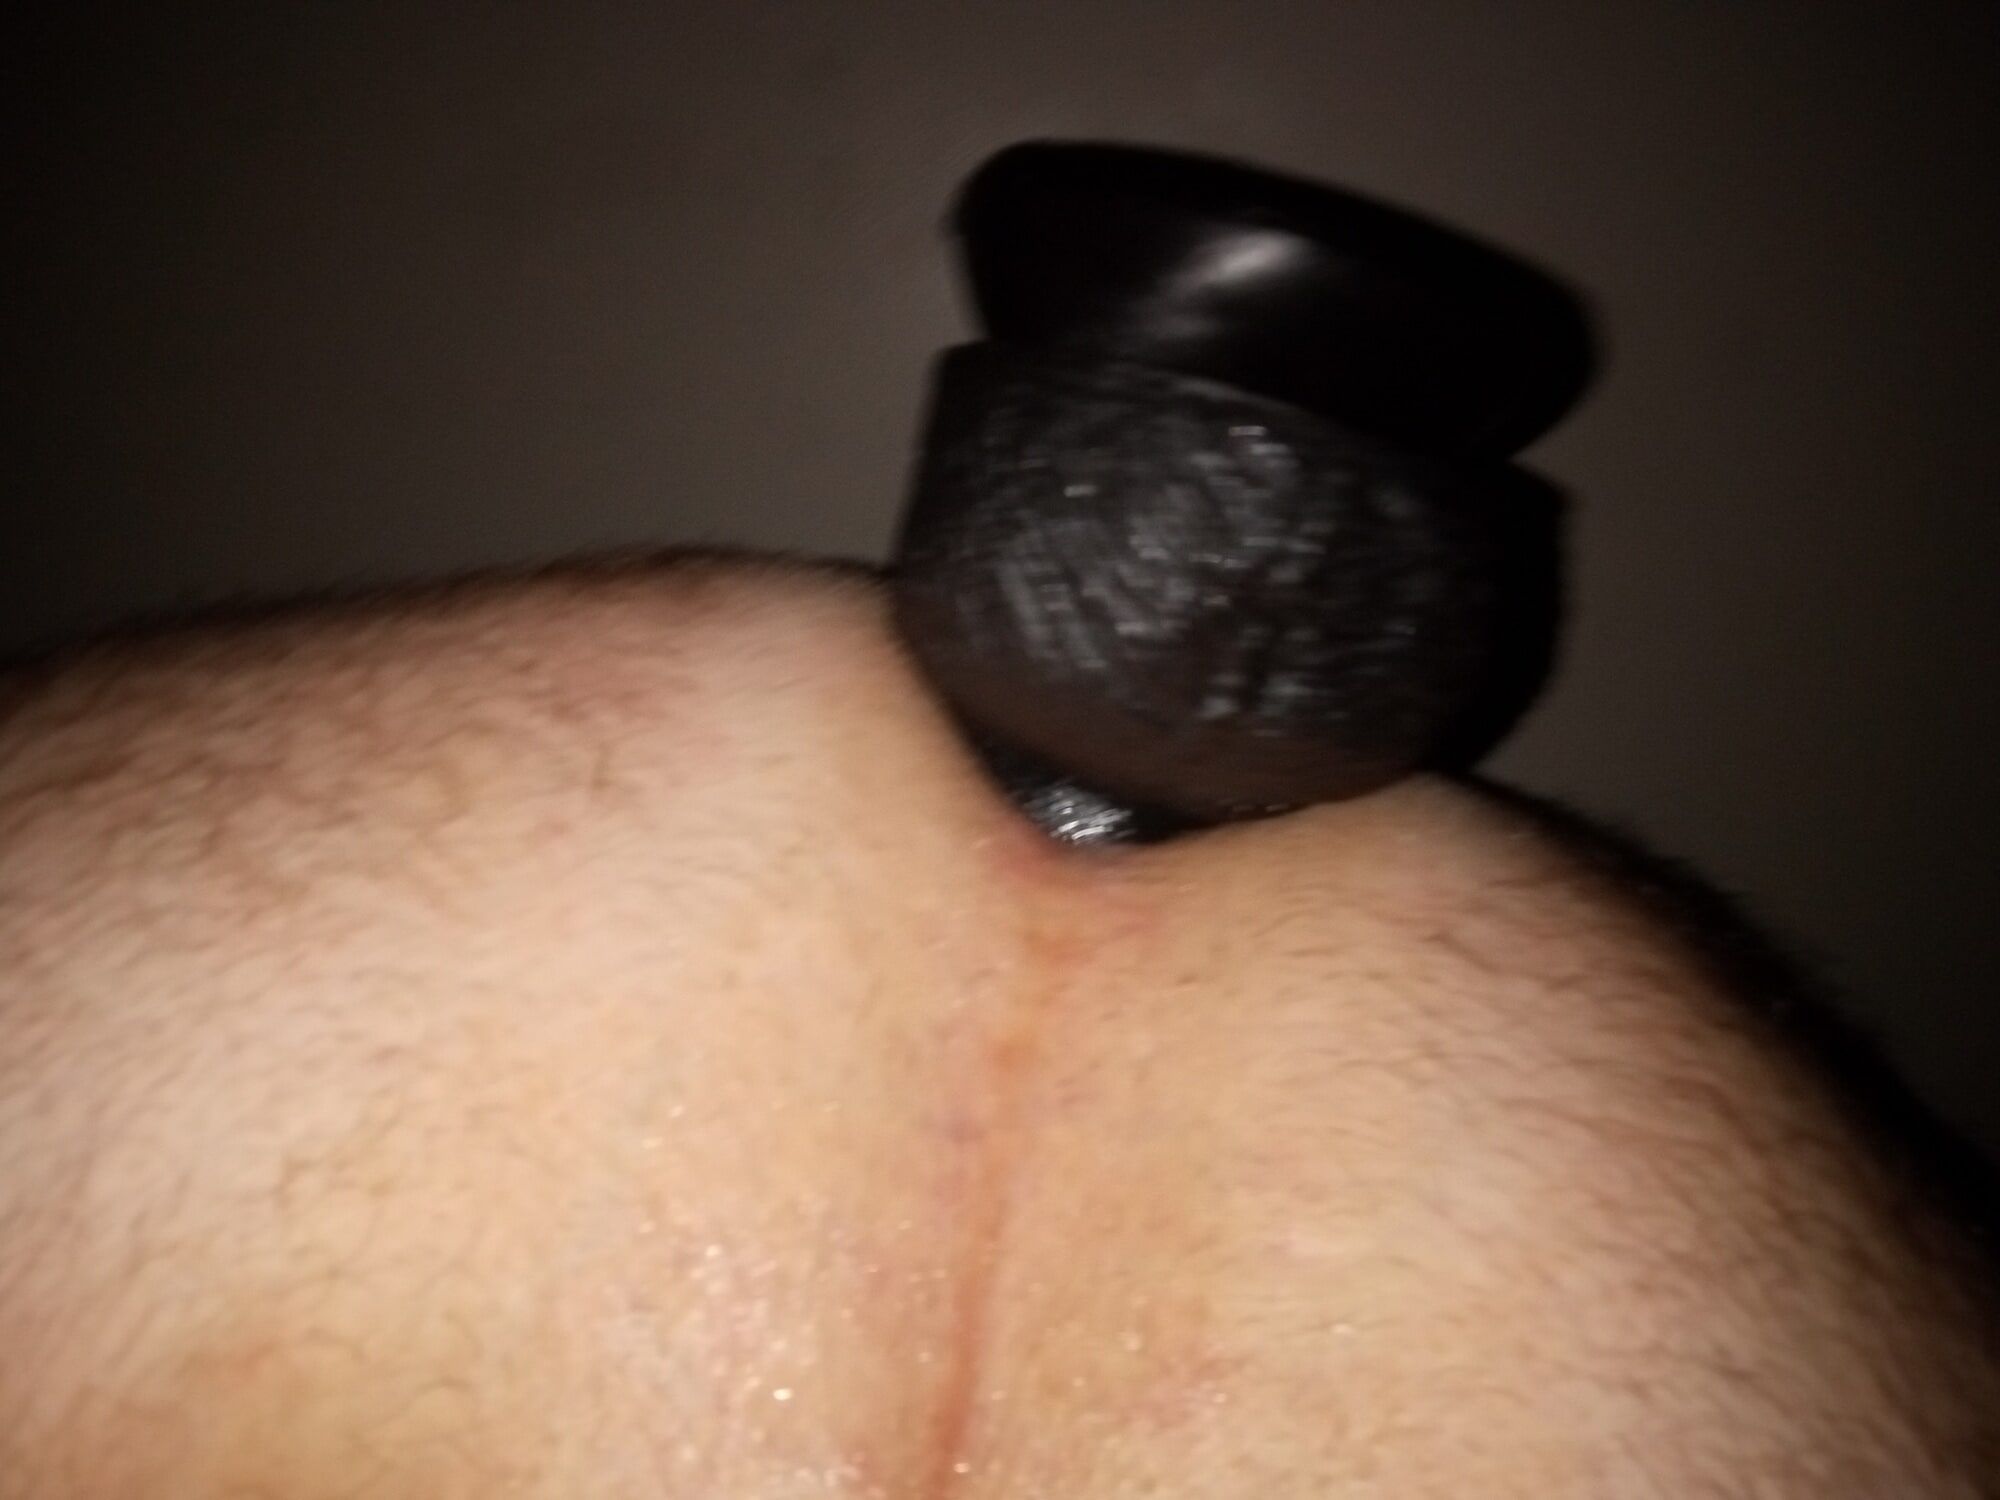 More dildos gaping my hole #3